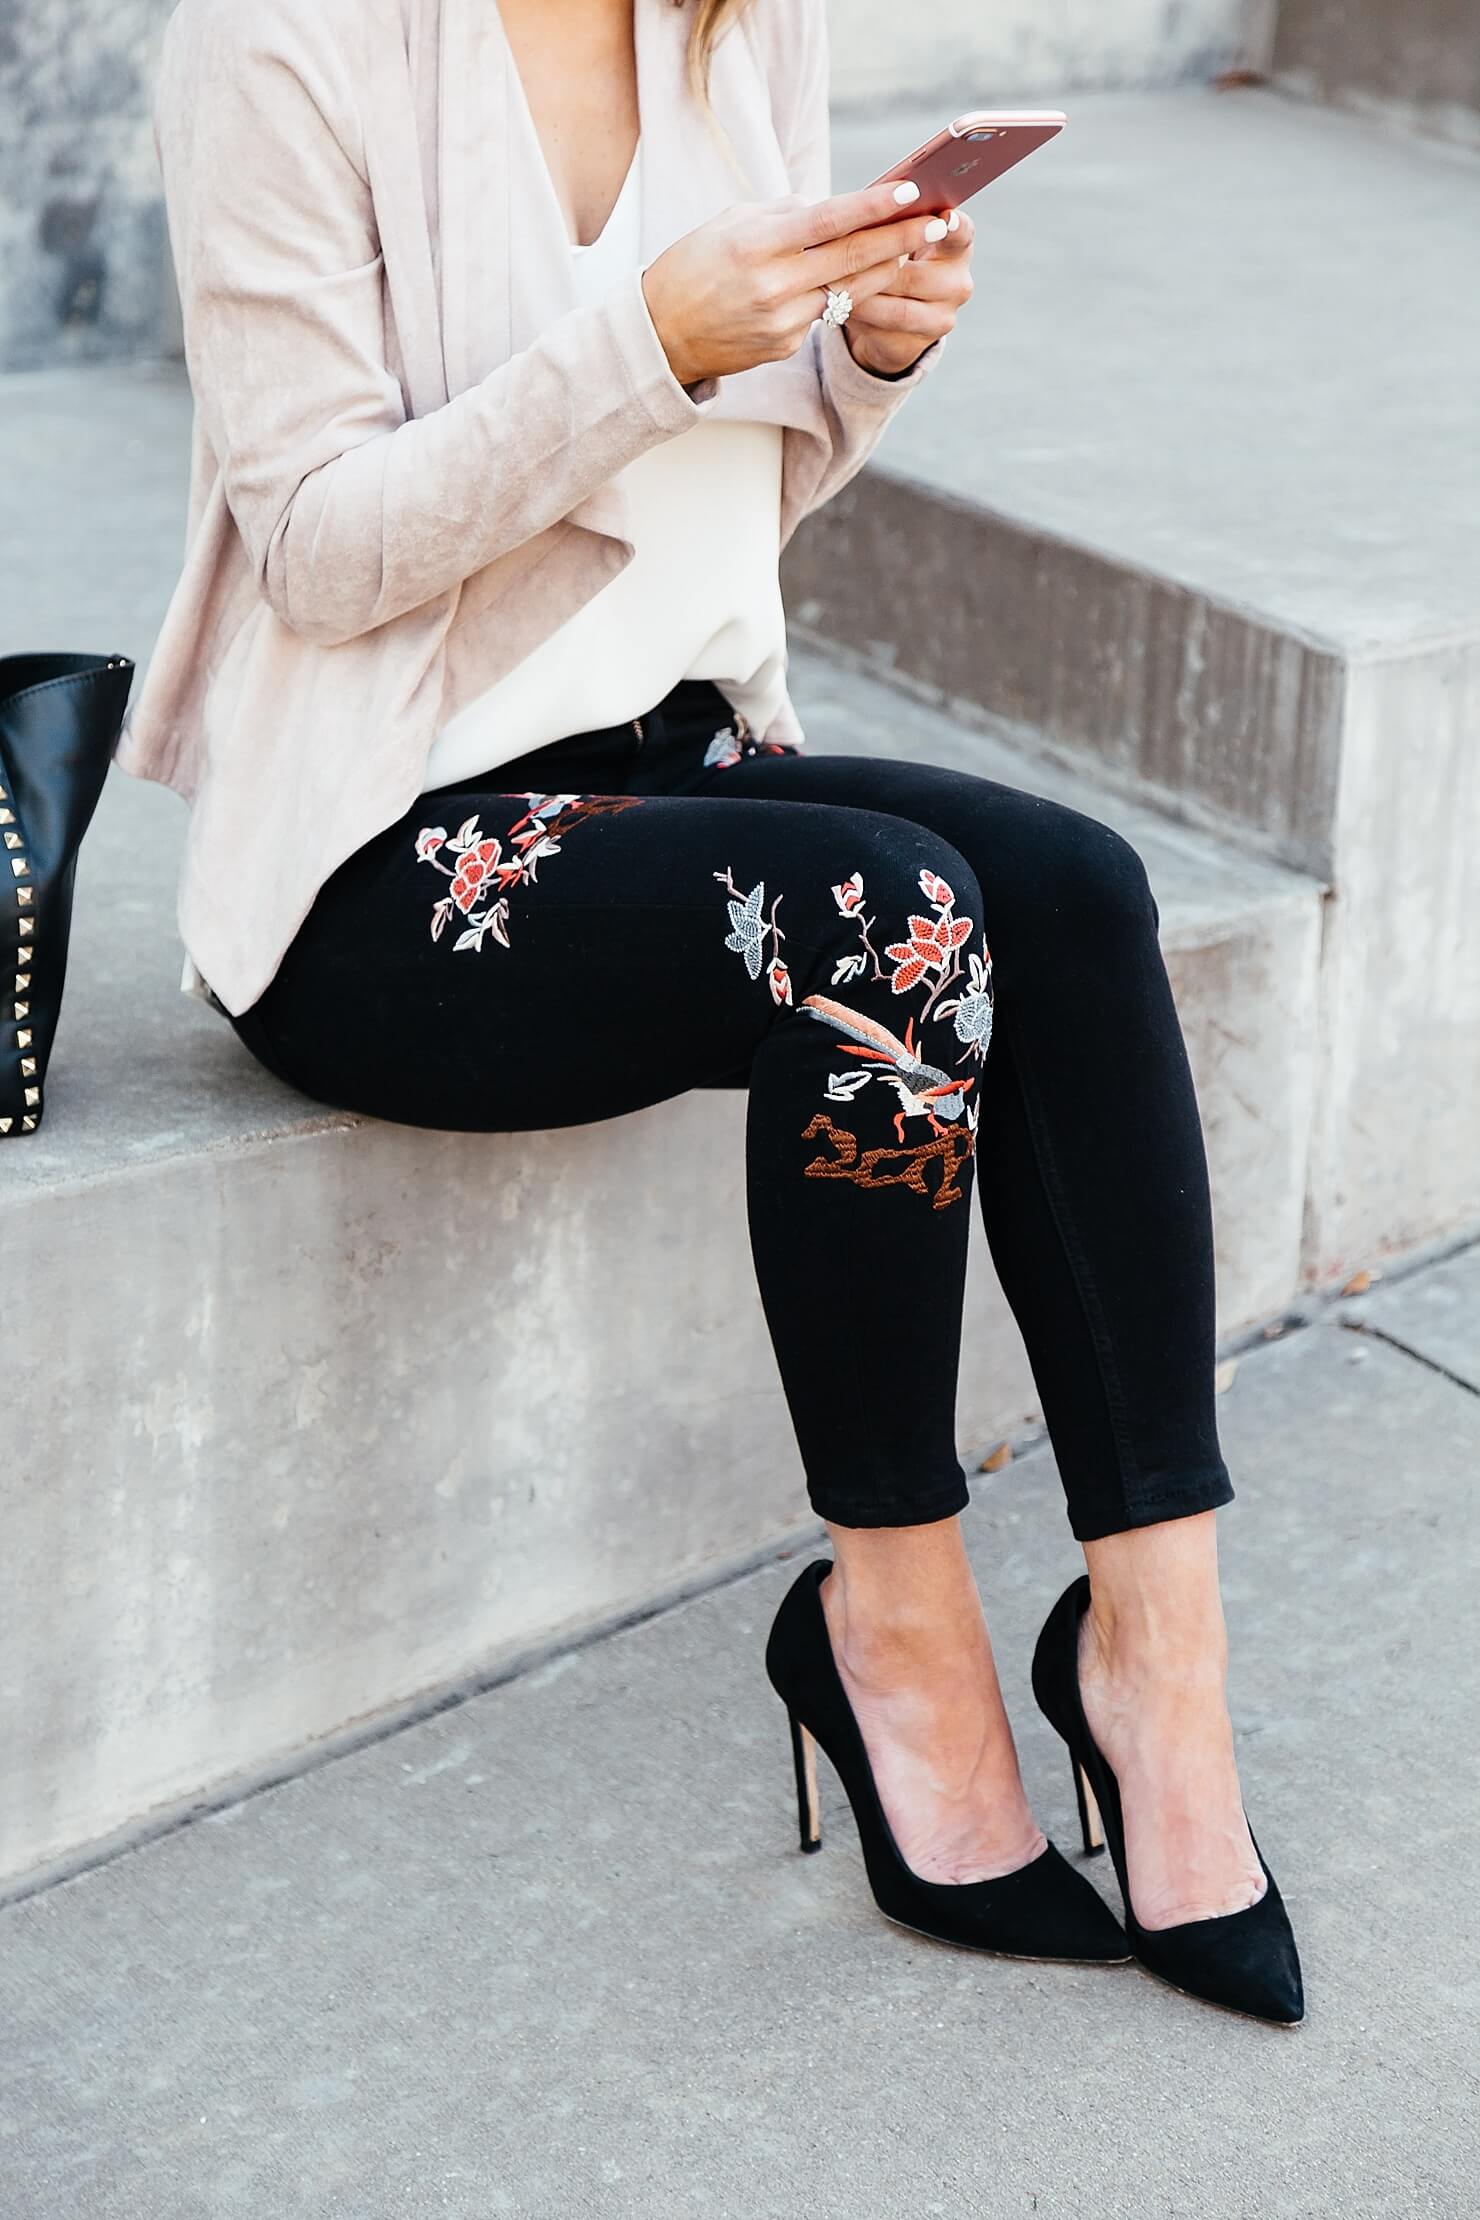 the embroidery trend, brighton keller wearing topshop floral embroidered jeans with bb dakota suede jacket and black dee keller portia pumps 